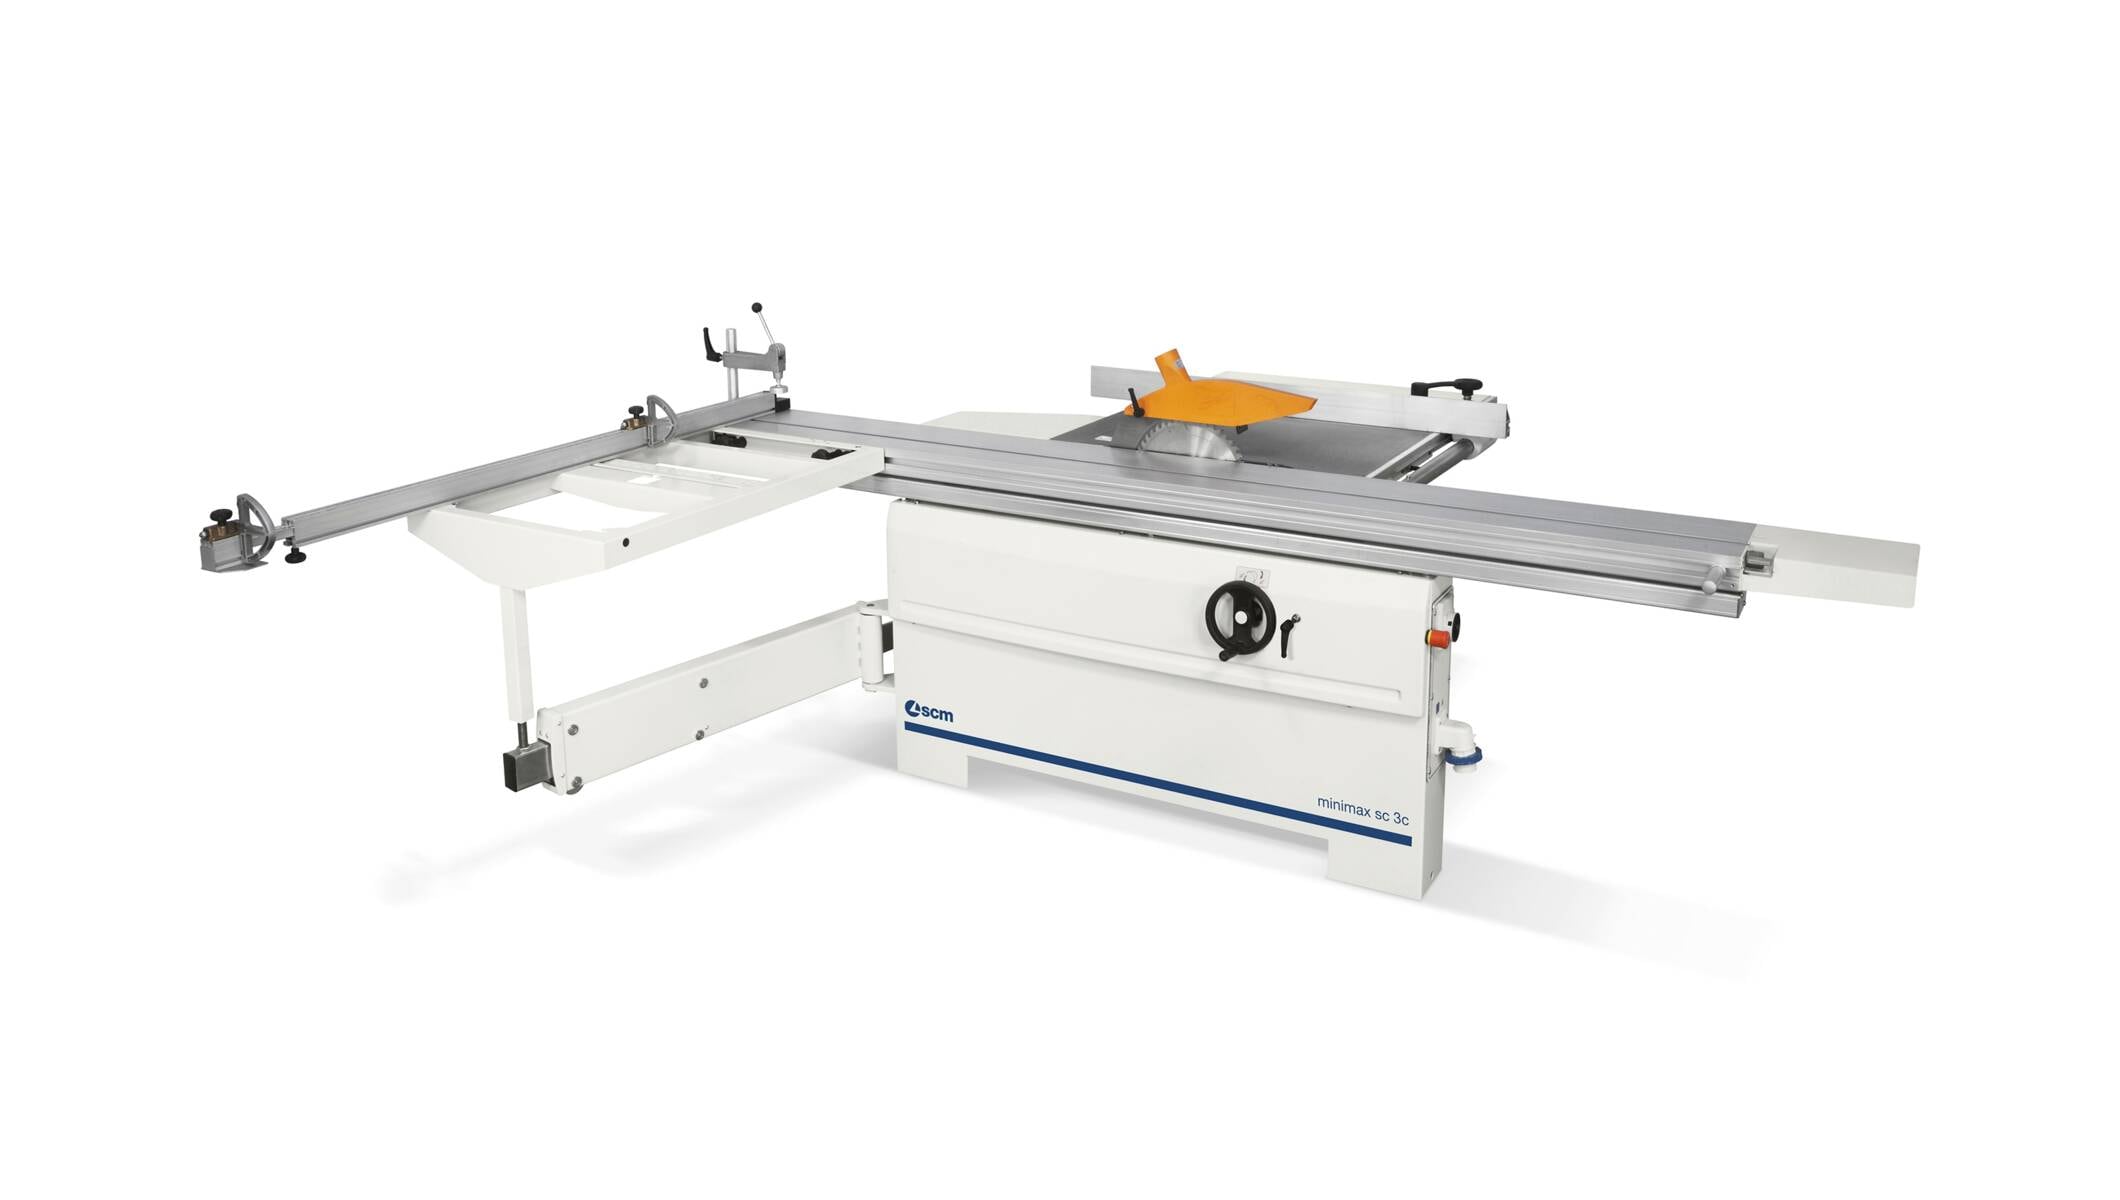 Joinery machines - Sliding table saws - minimax sc 3c